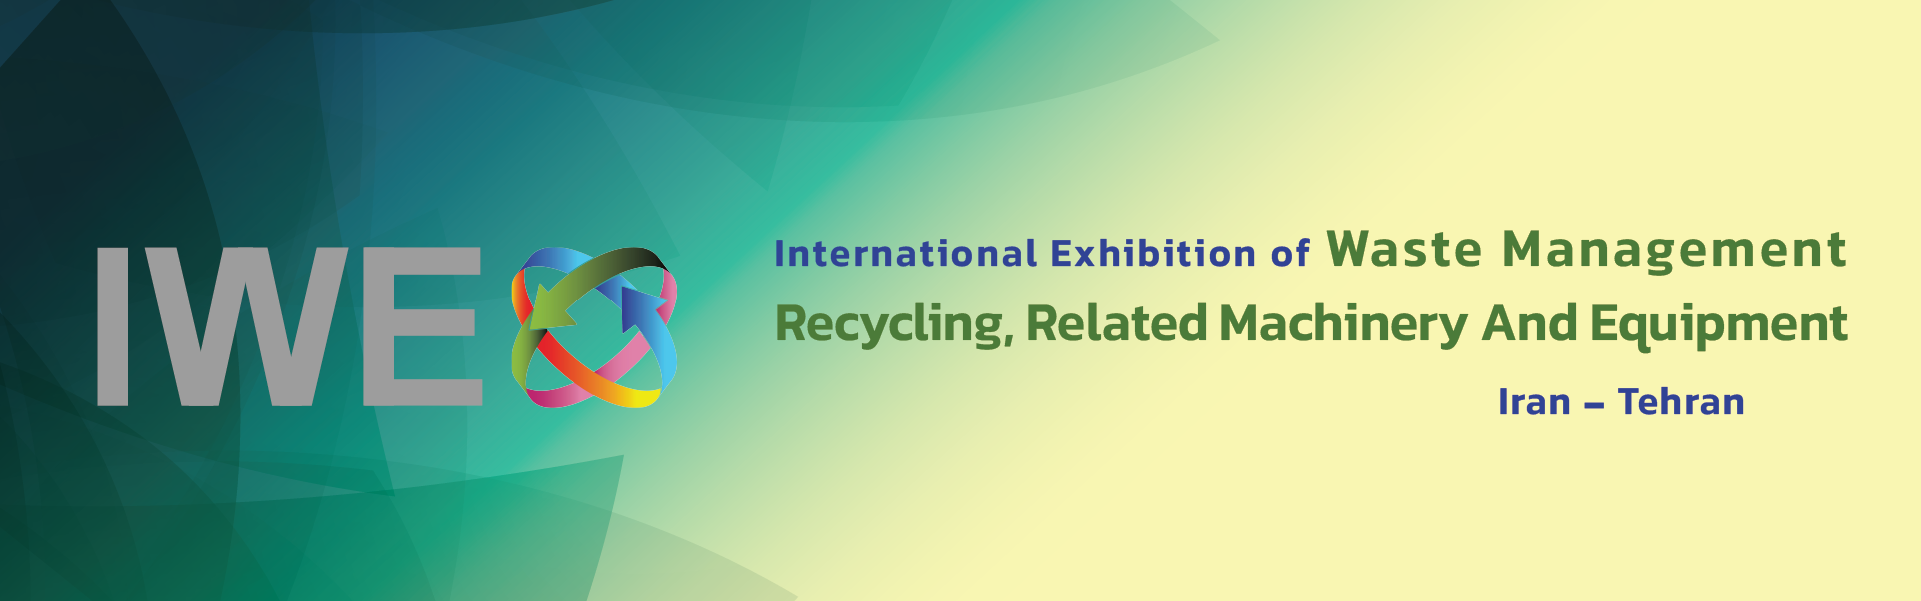 Waste management and recycling Exhibition Iran